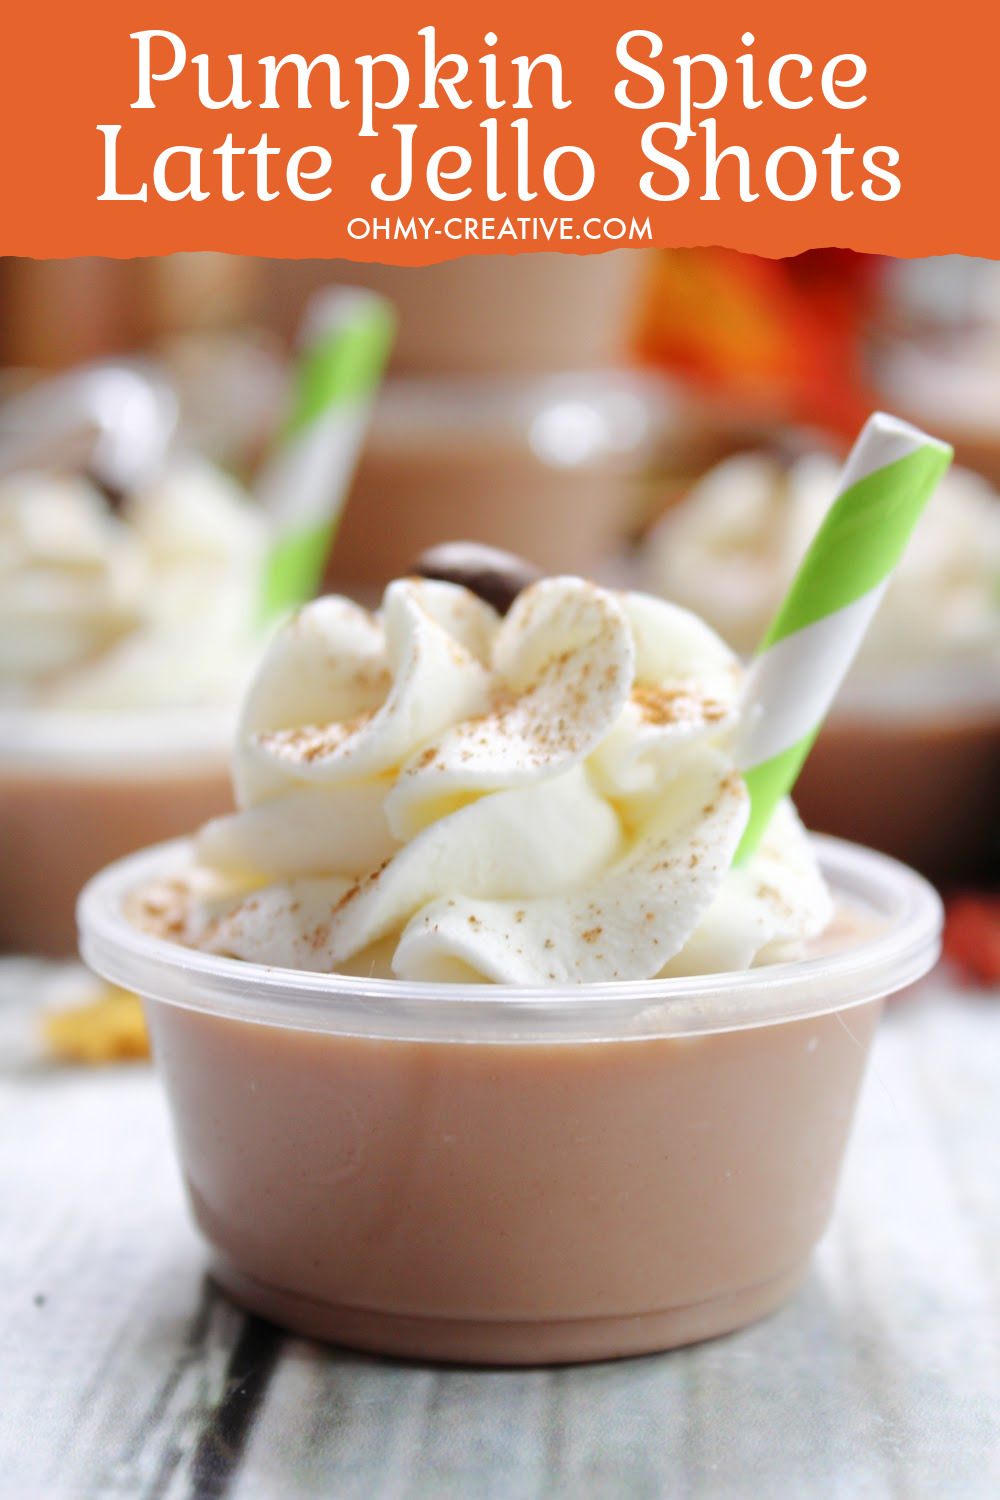 A close up view of a yummy pumpkin spice latte jello shots topped with whipped cream and dusted with cinnamon!